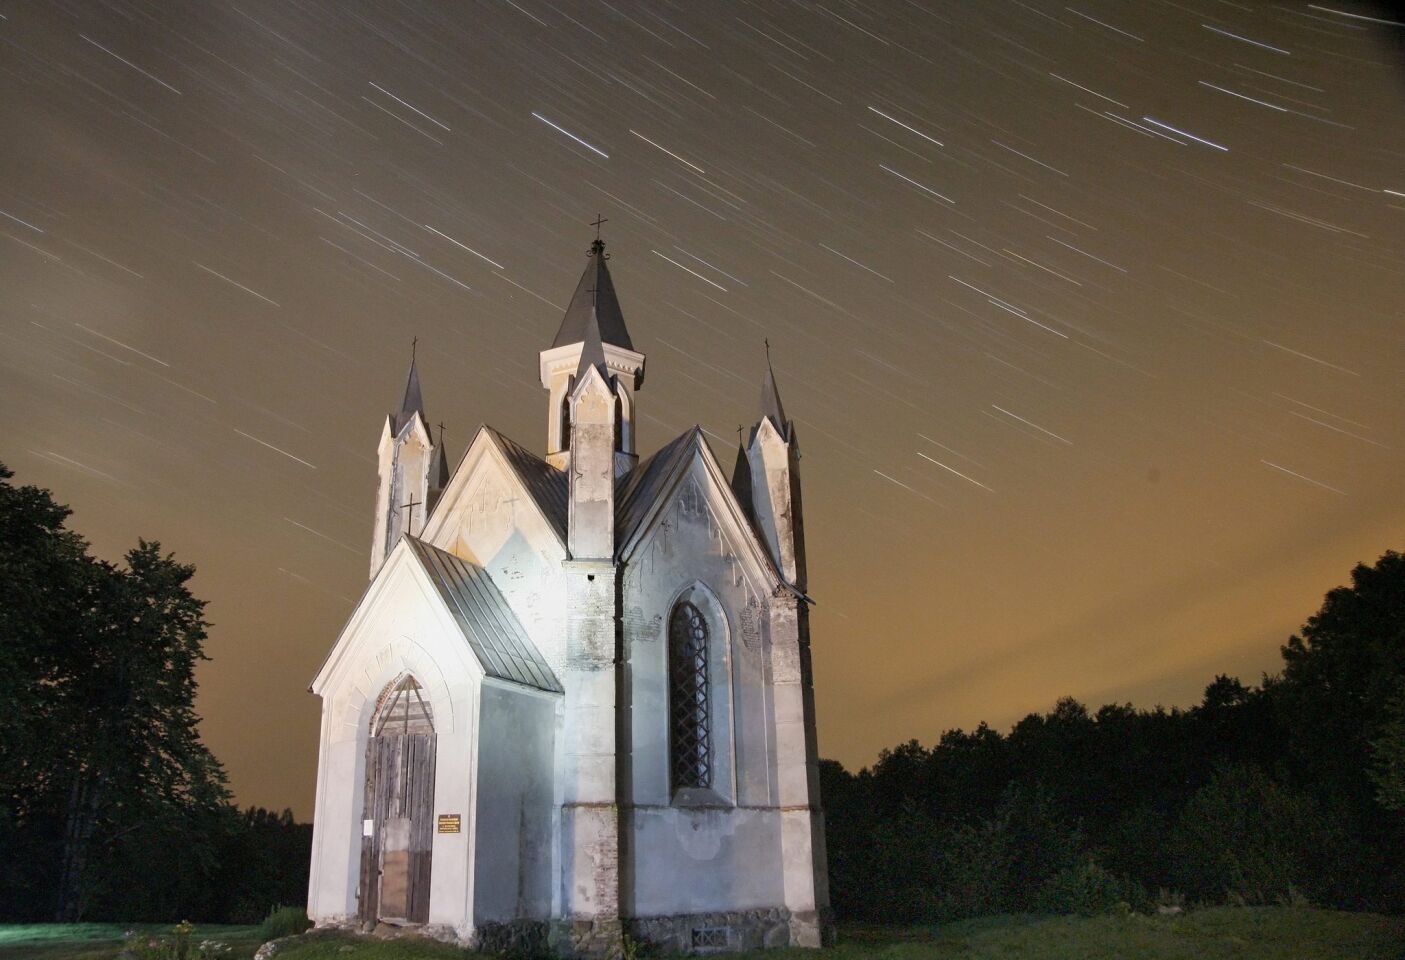 A Catholic church is seen on a time-exposure during the Perseid meteor shower near the village of Bogushevichi in Belarus.